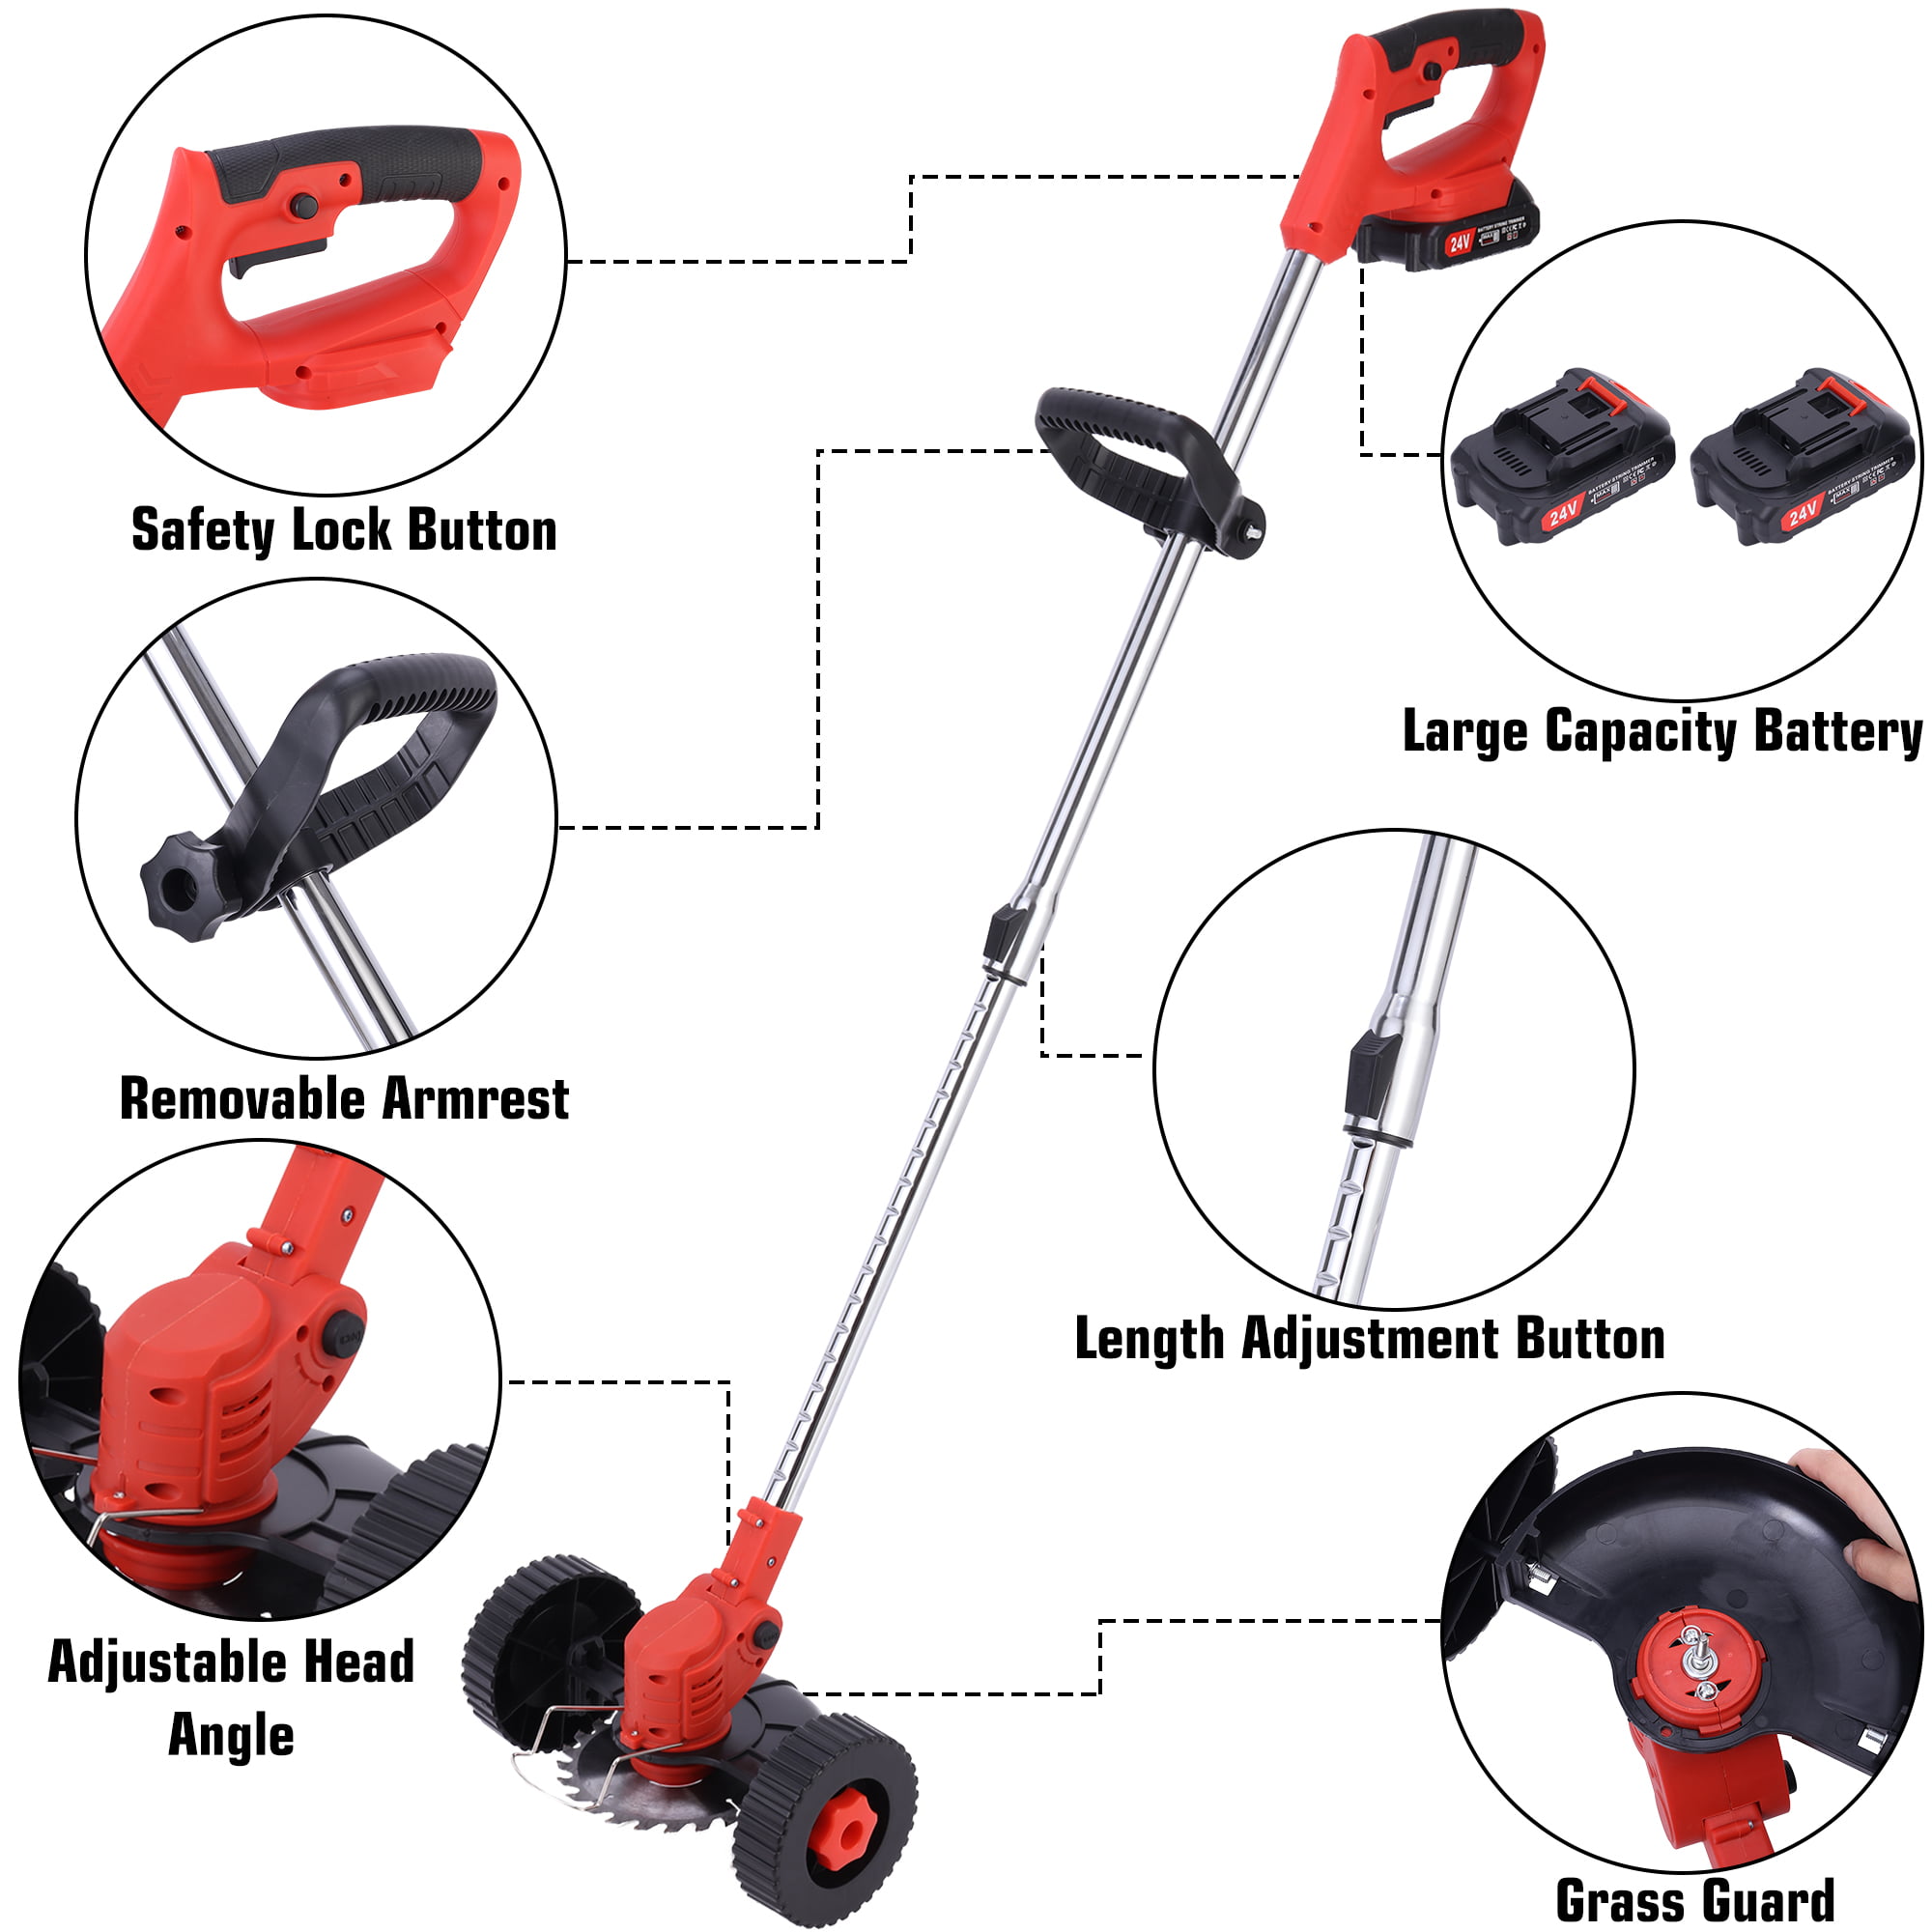  Redback 120V 16 inch String Trimmer, Cordless Weed Eater,  Brushless Motor, 2Ah Battery and 1A Charger Included : Patio, Lawn & Garden